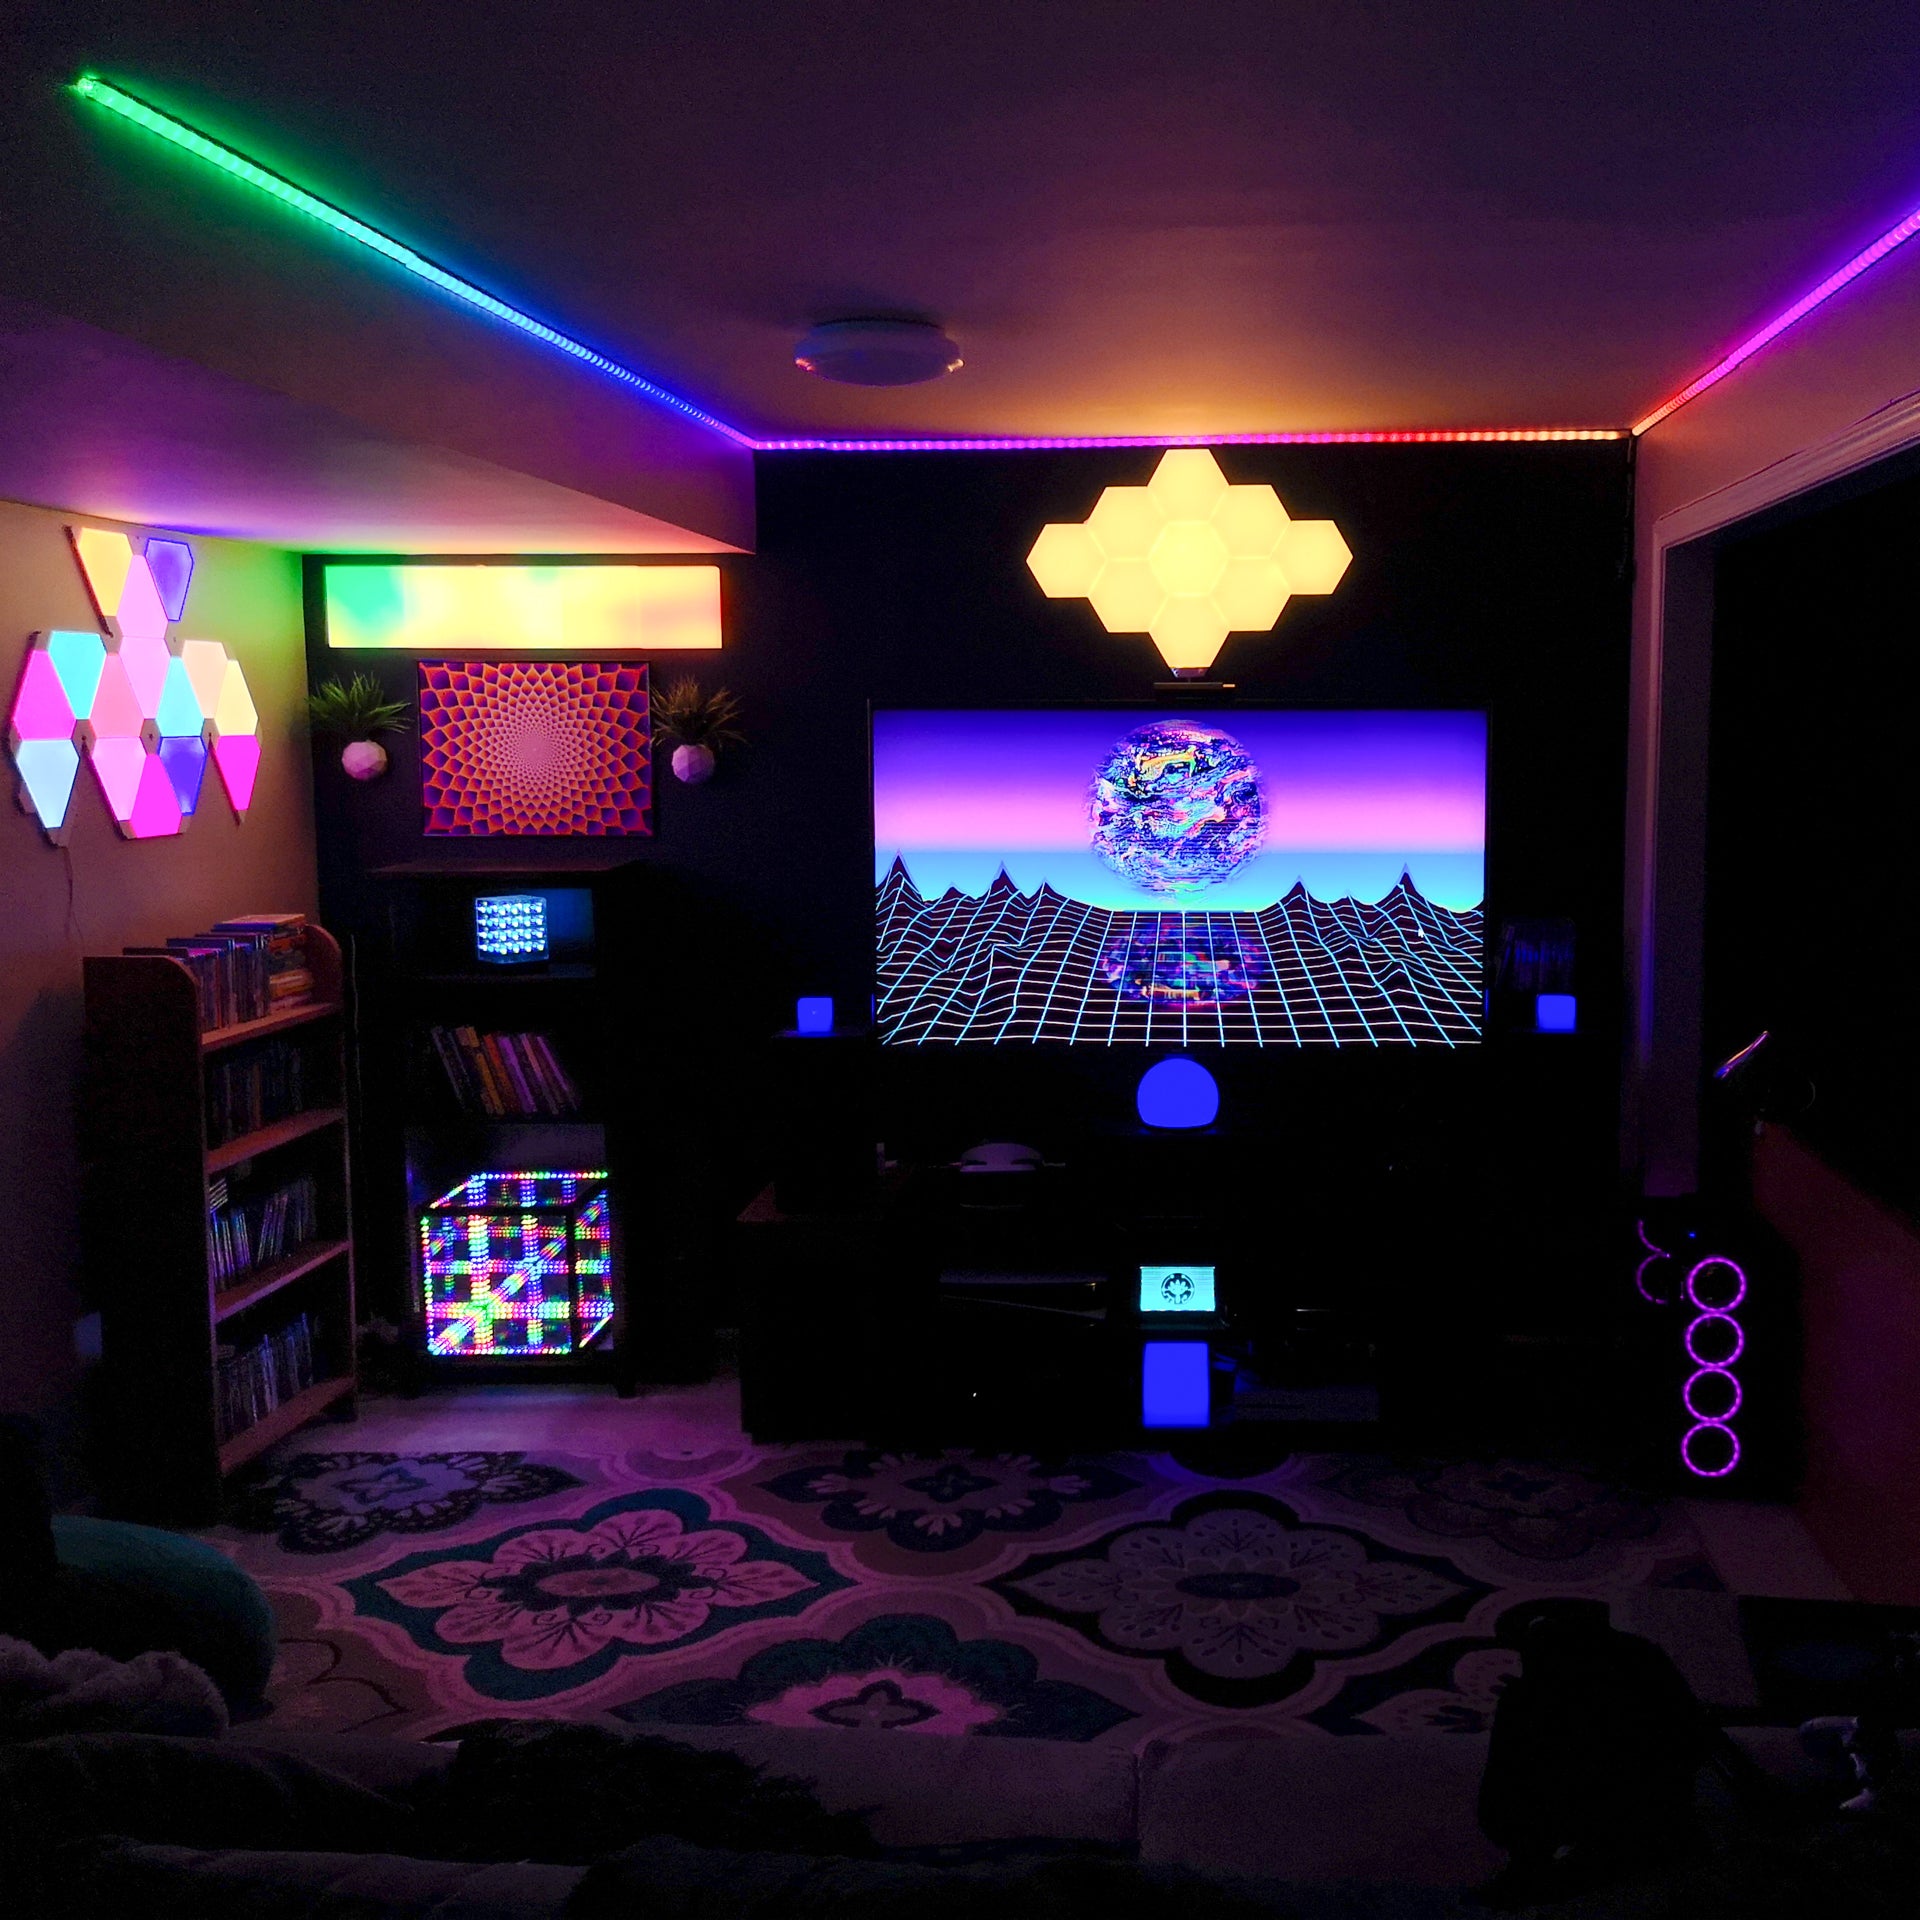 Room with a TV in the middle of the wall facing viewer, a small patterned rug on the floor, LED strip lights lining the ceiling, a HyperCube,  and other creative decorative lighting ideas